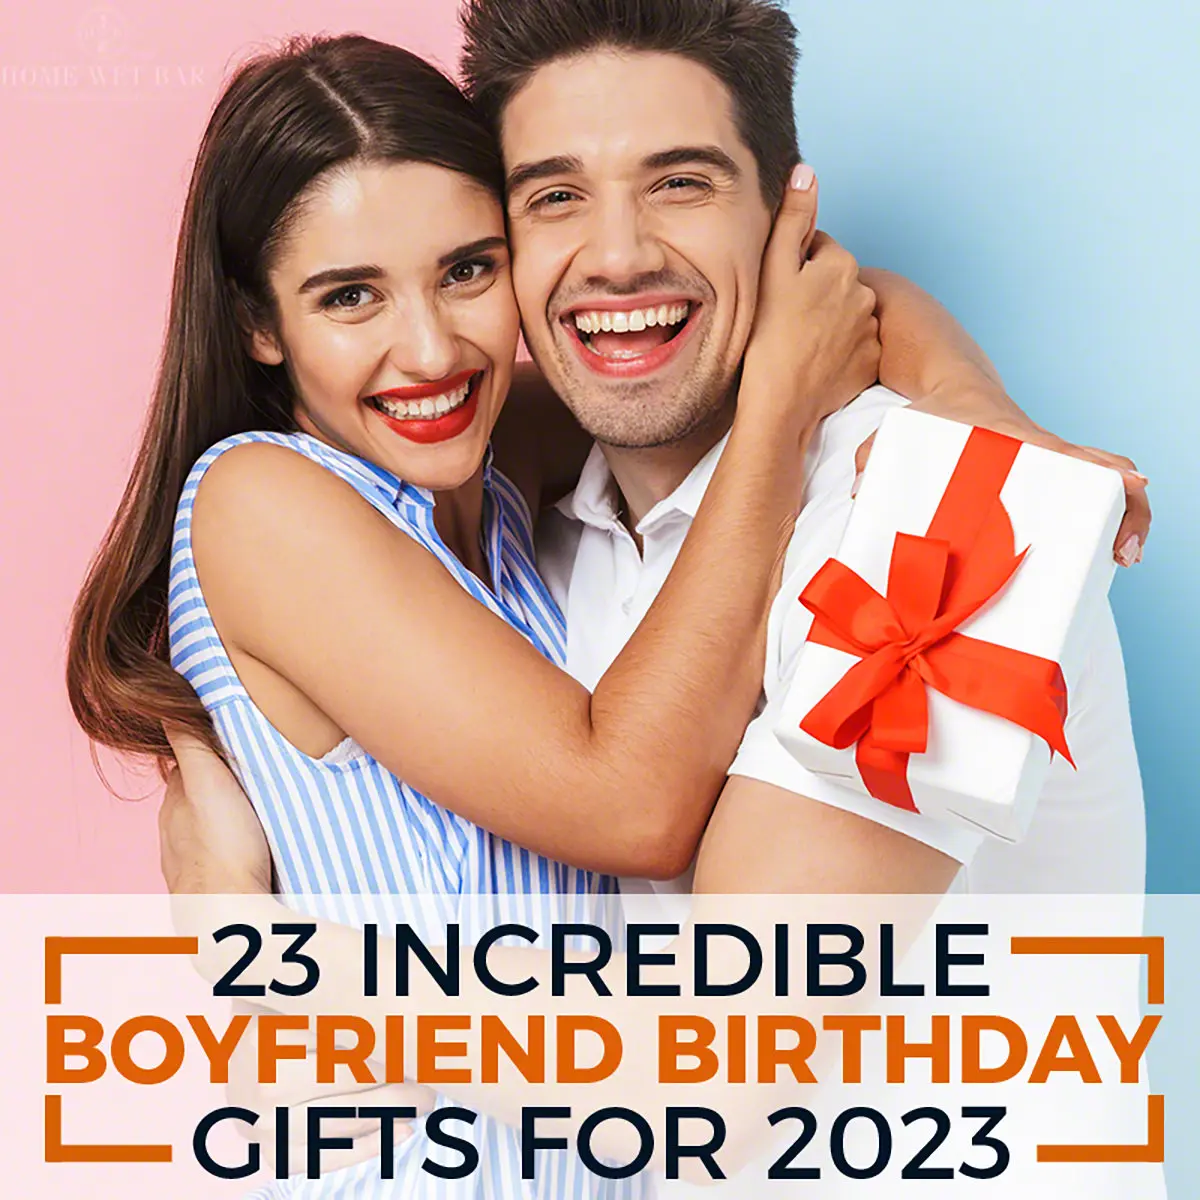 23 Incredible Boyfriend Birthday Gifts for 2023